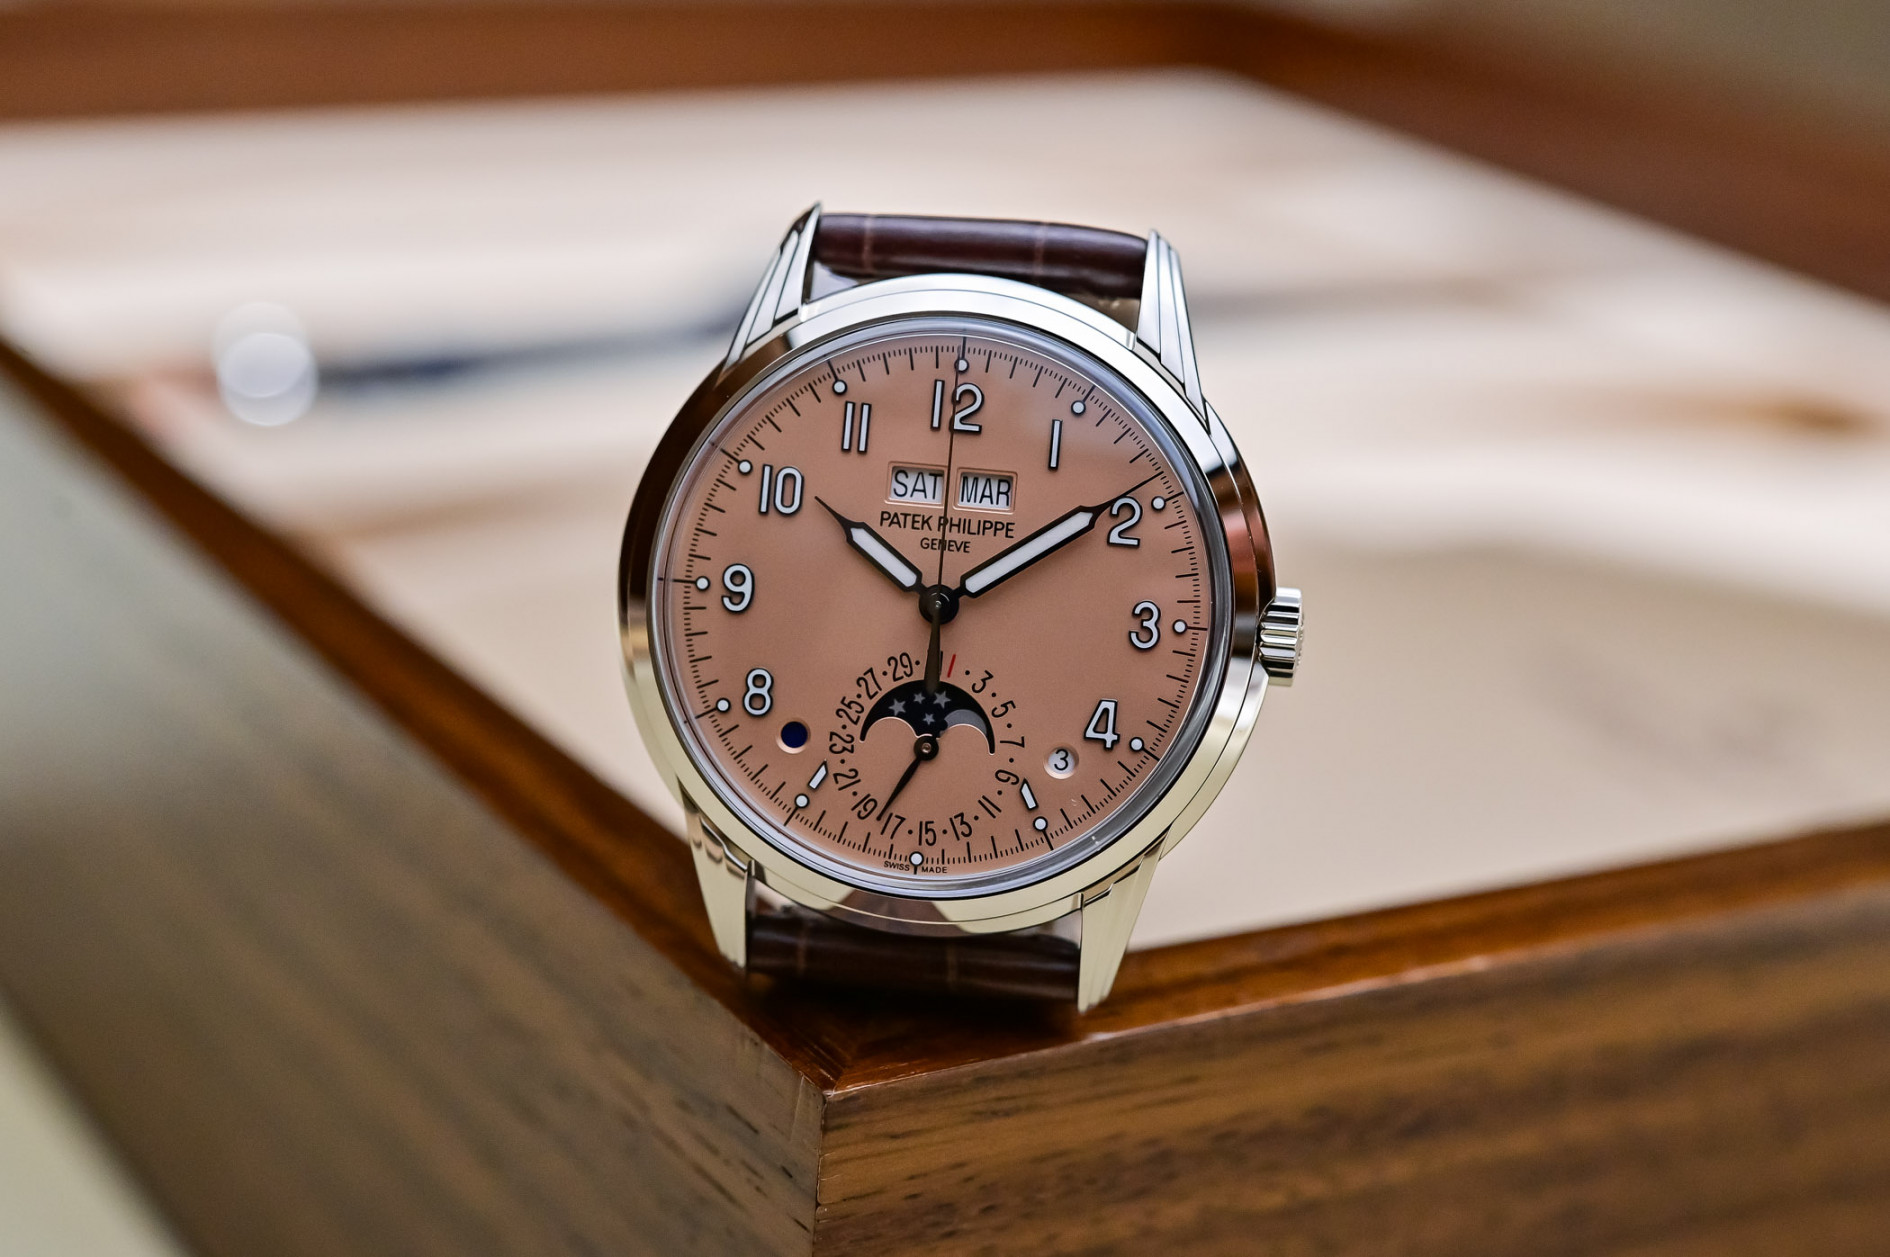 Buying Guide - From Time & Date watches to Secular Calendars